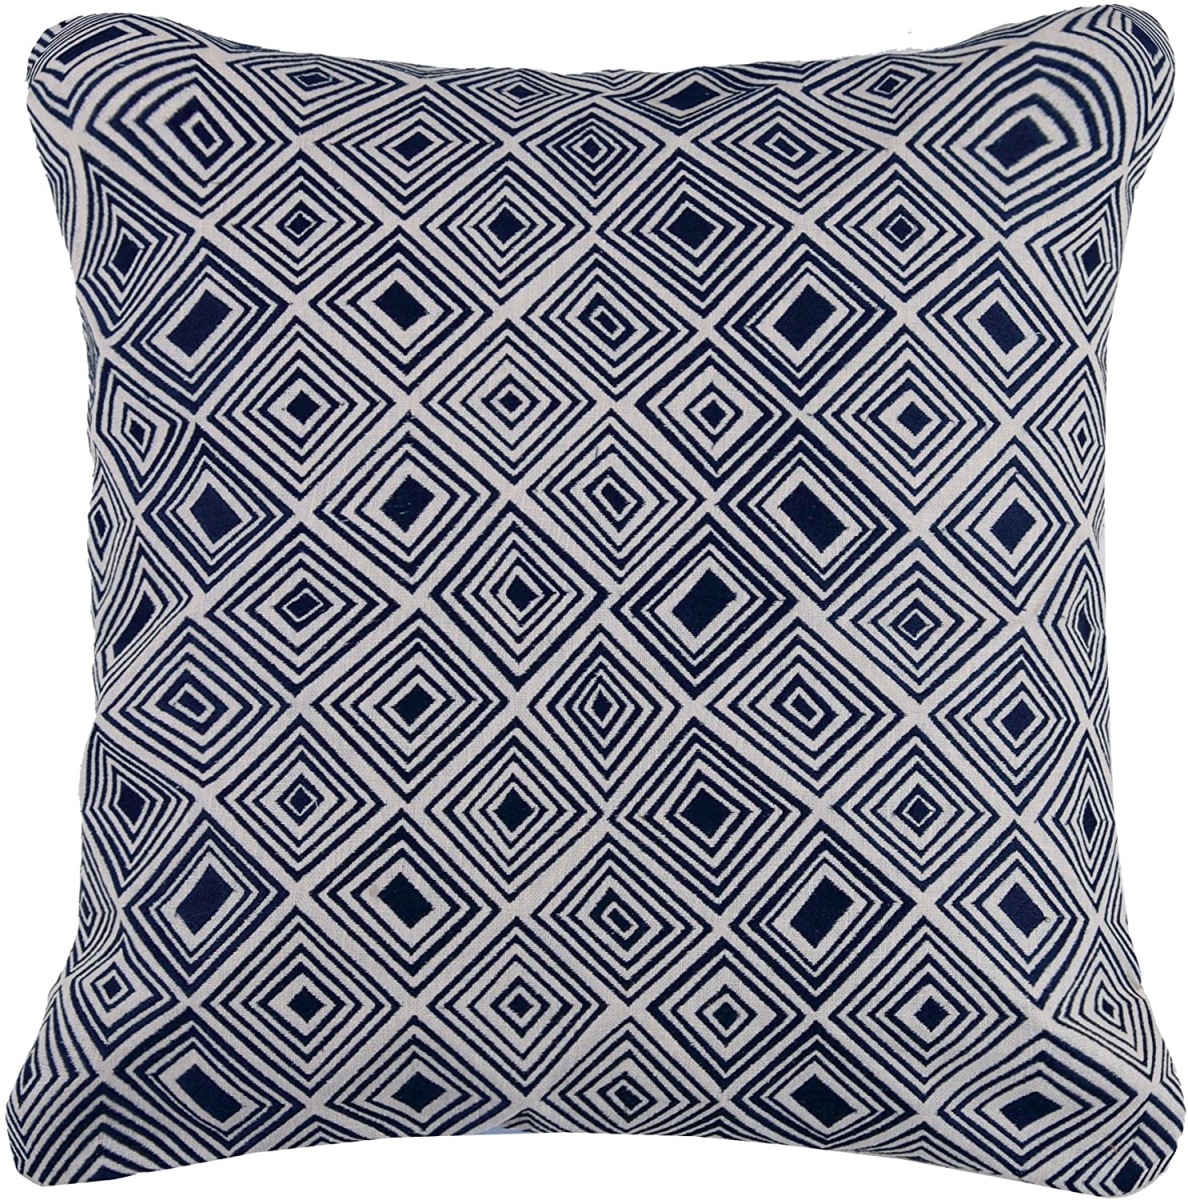 Picture of D.L Rhein 24DL661CC20SQ 20 x 20 in. Nomad Embroidered Linen Pillow, Indigo